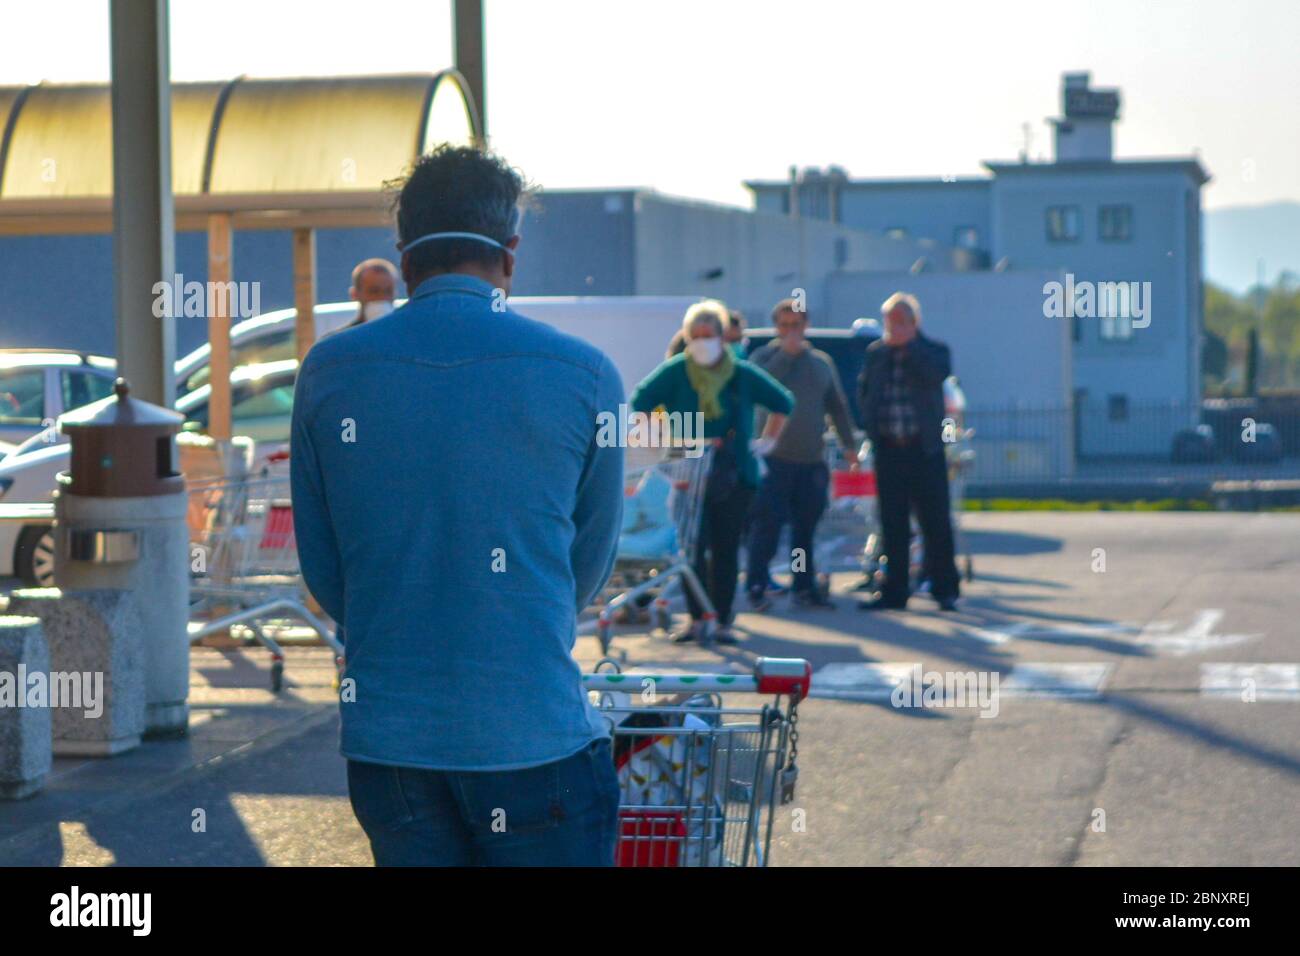 Symbolic scene from an italian grocery store during coronavirus pandemic: the back of a man with COVID-19 protective mask exiting with shopping cart Stock Photo